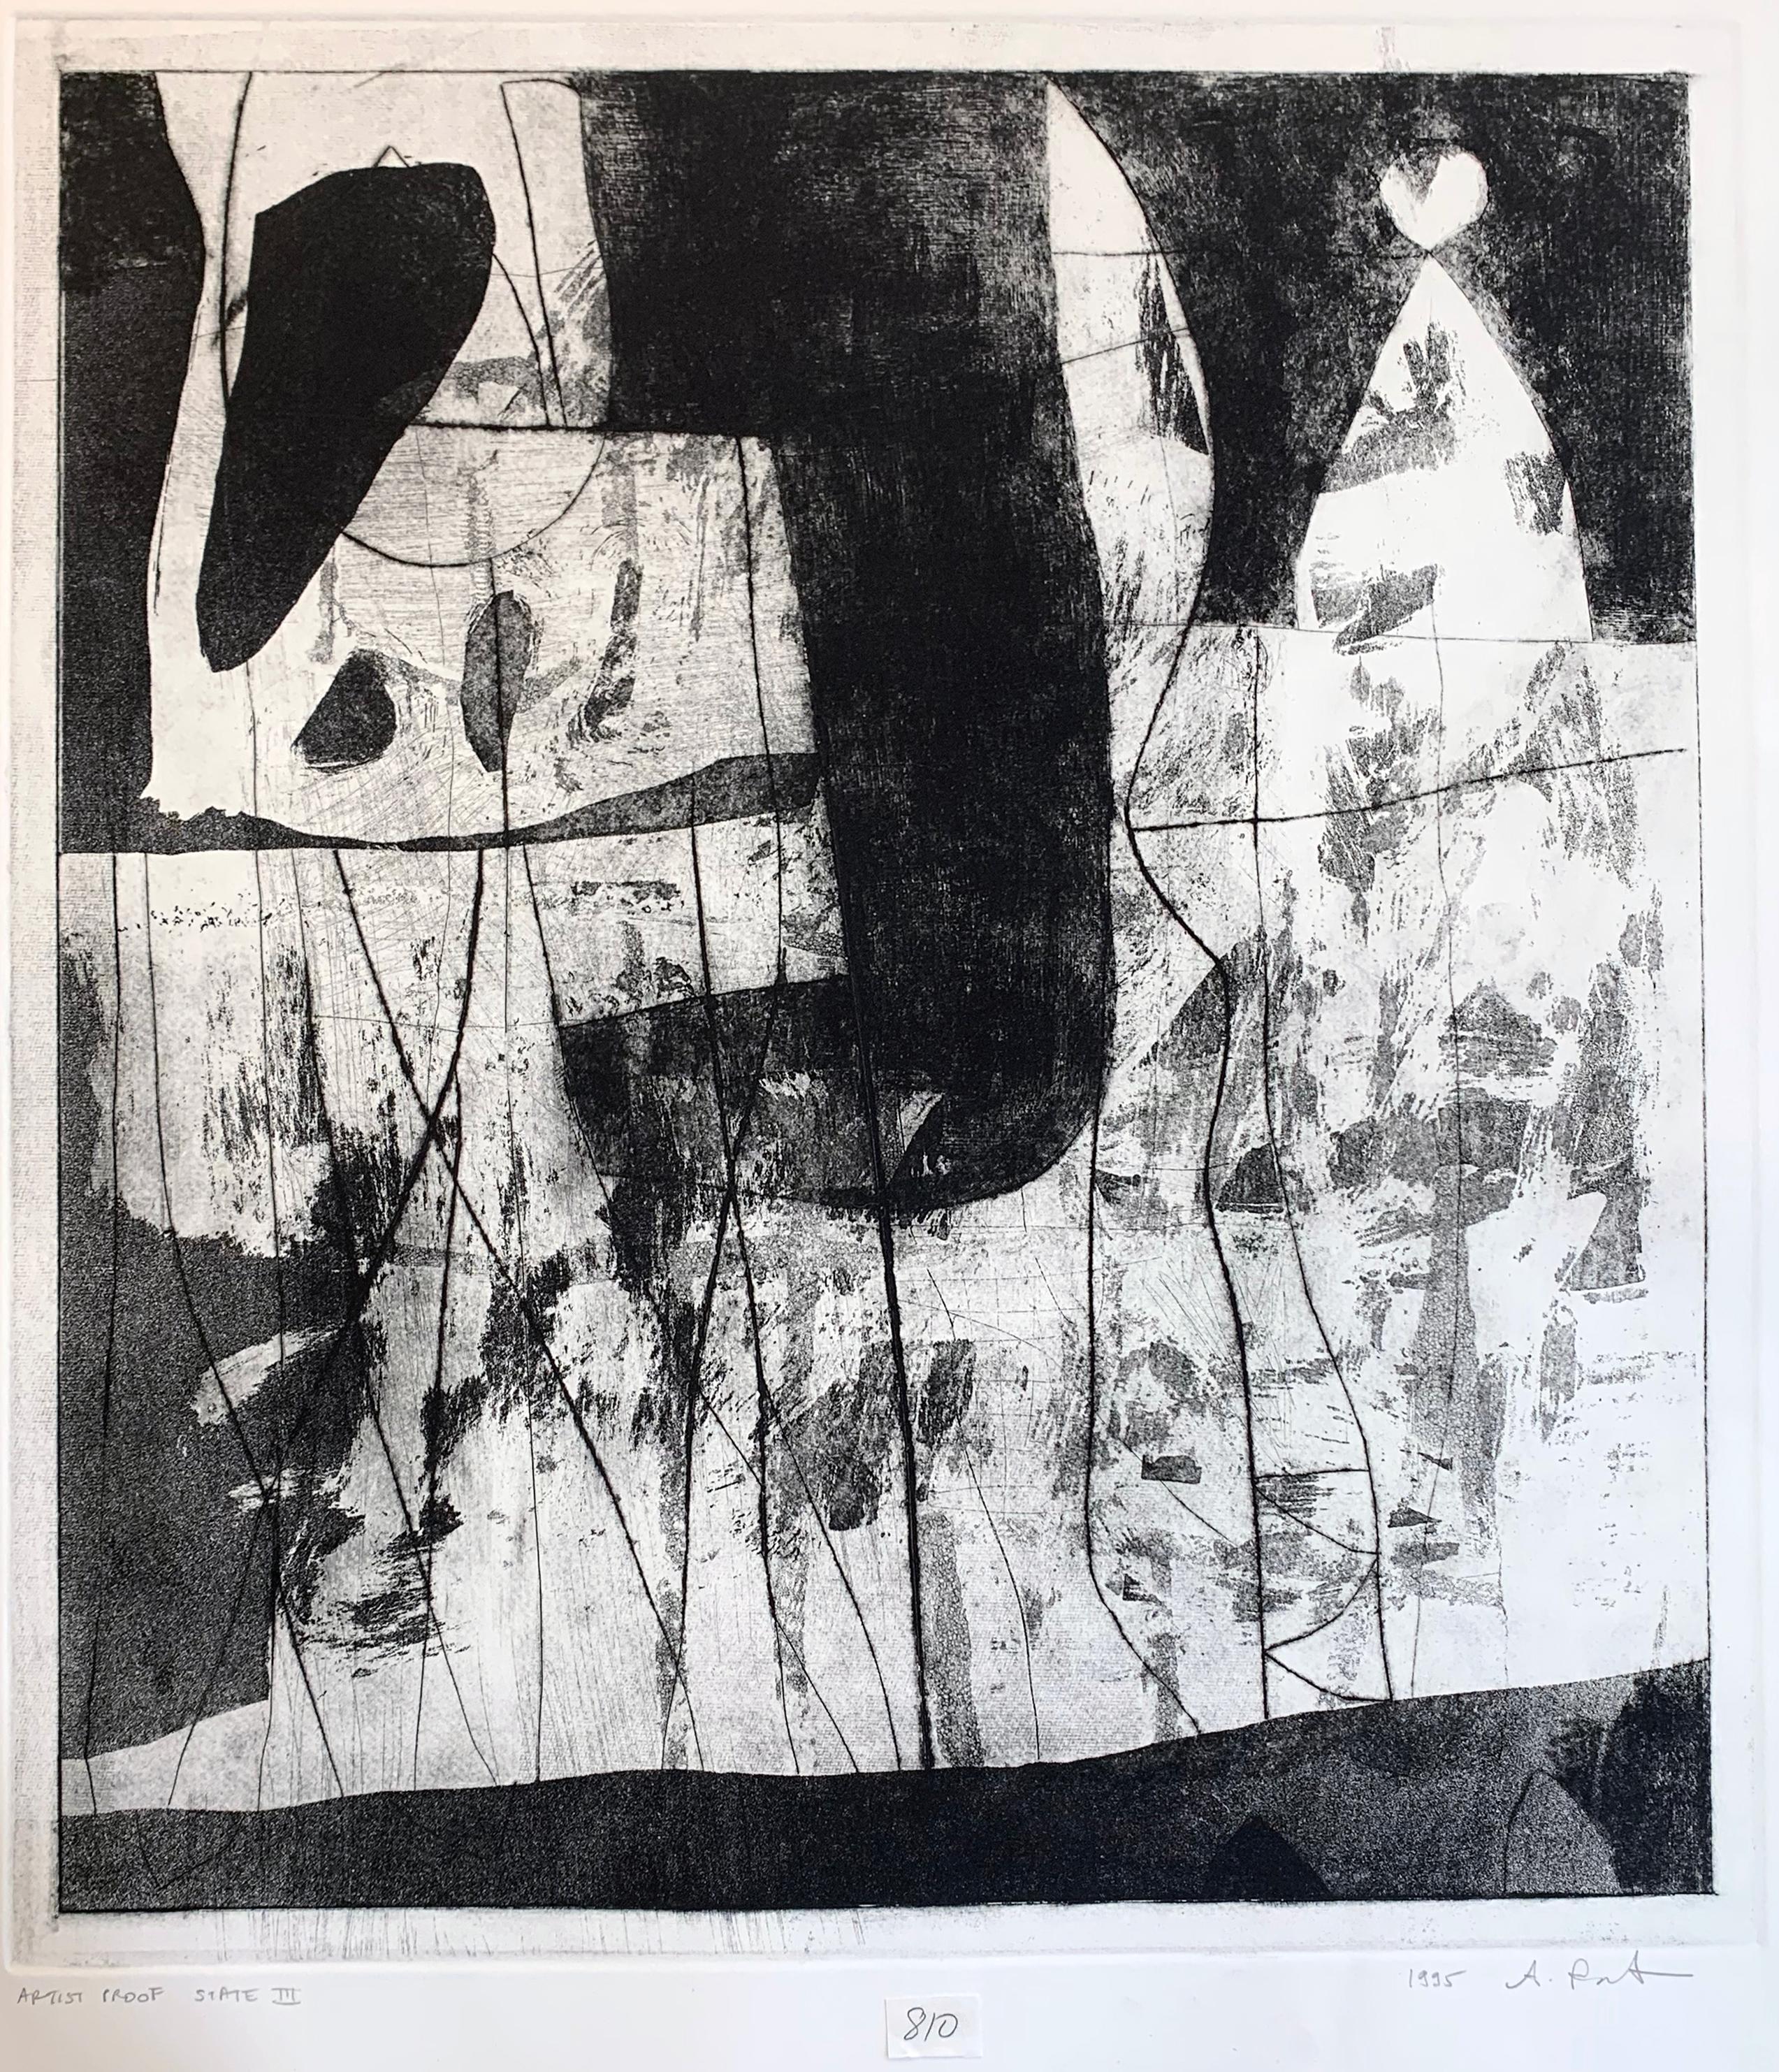 Alexis Portilla Abstract Print - 28x23 in. Abstract Black and White - "Soglio" Etching  - unframed